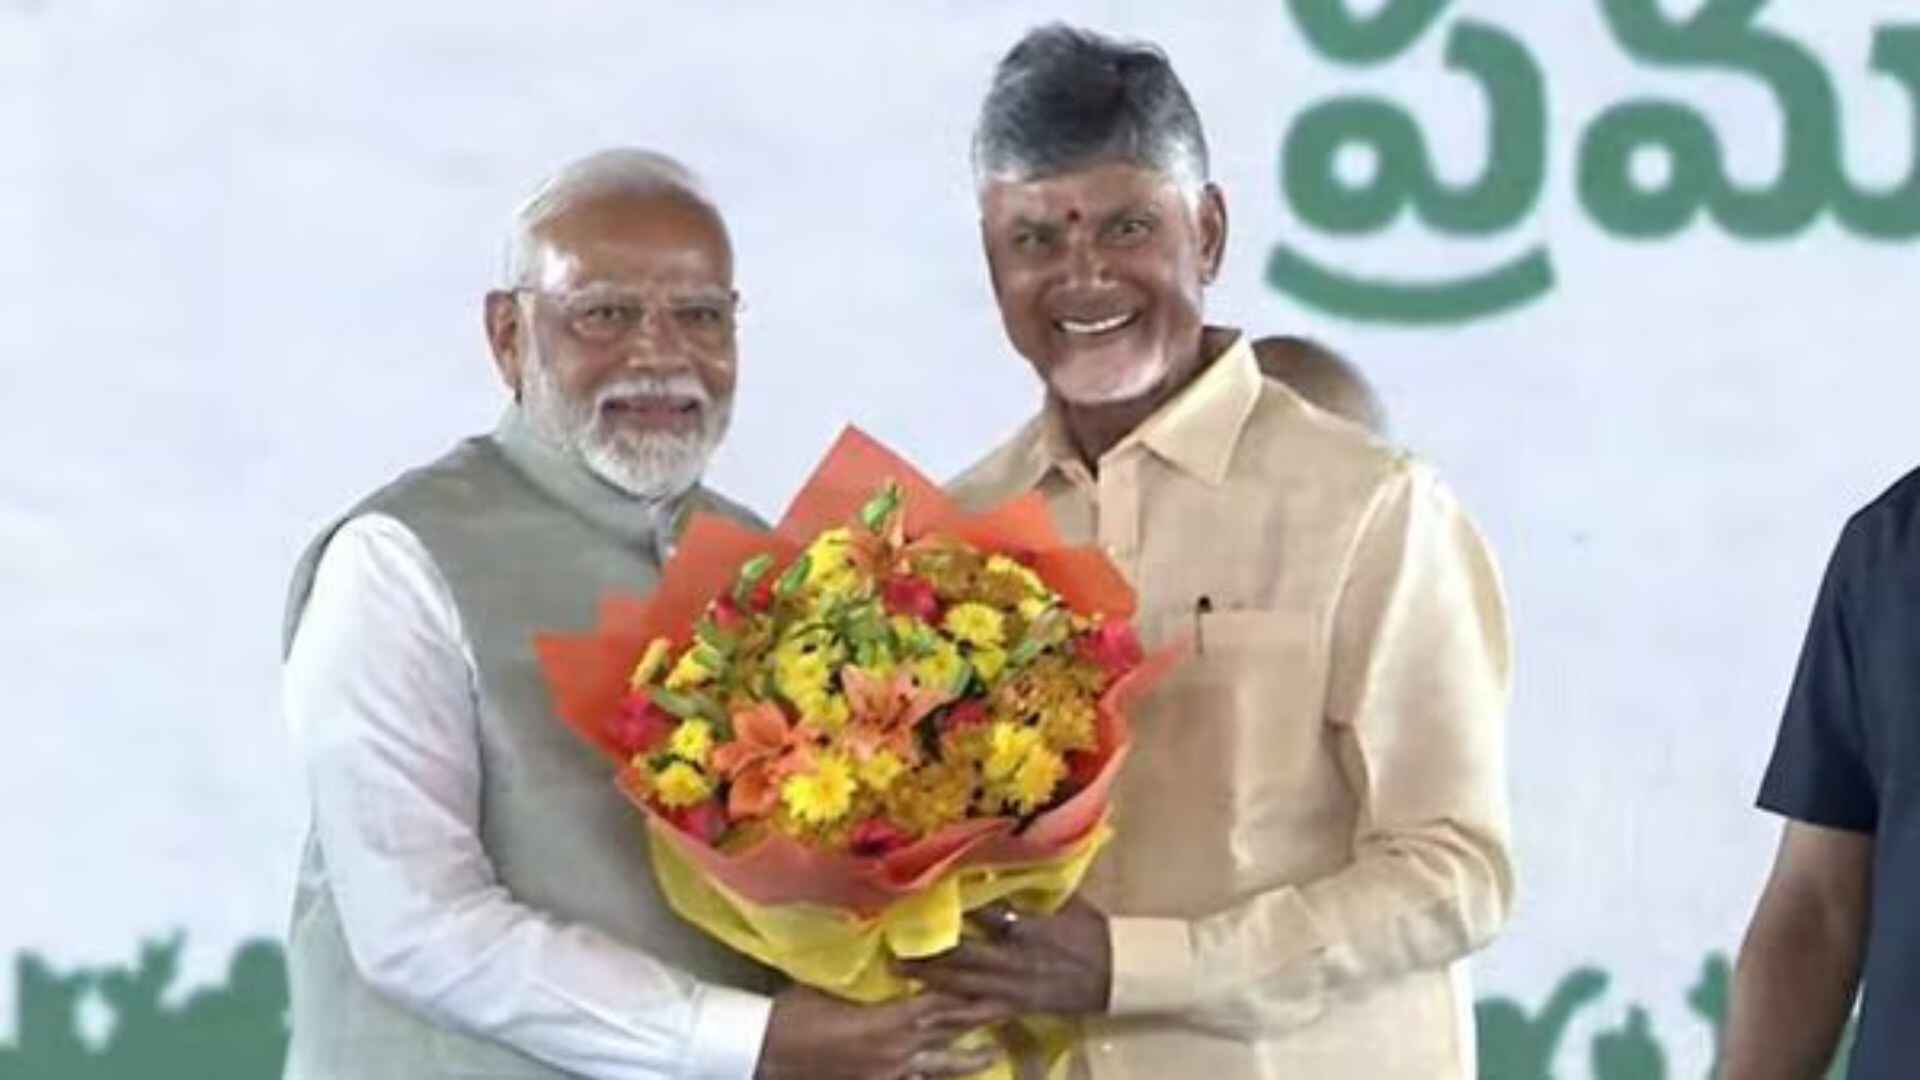 Chandrababu Naidu Immediately Updates LinkedIn Upon Oath, Declares ‘Resuming Duties As People’s Chief Minister’